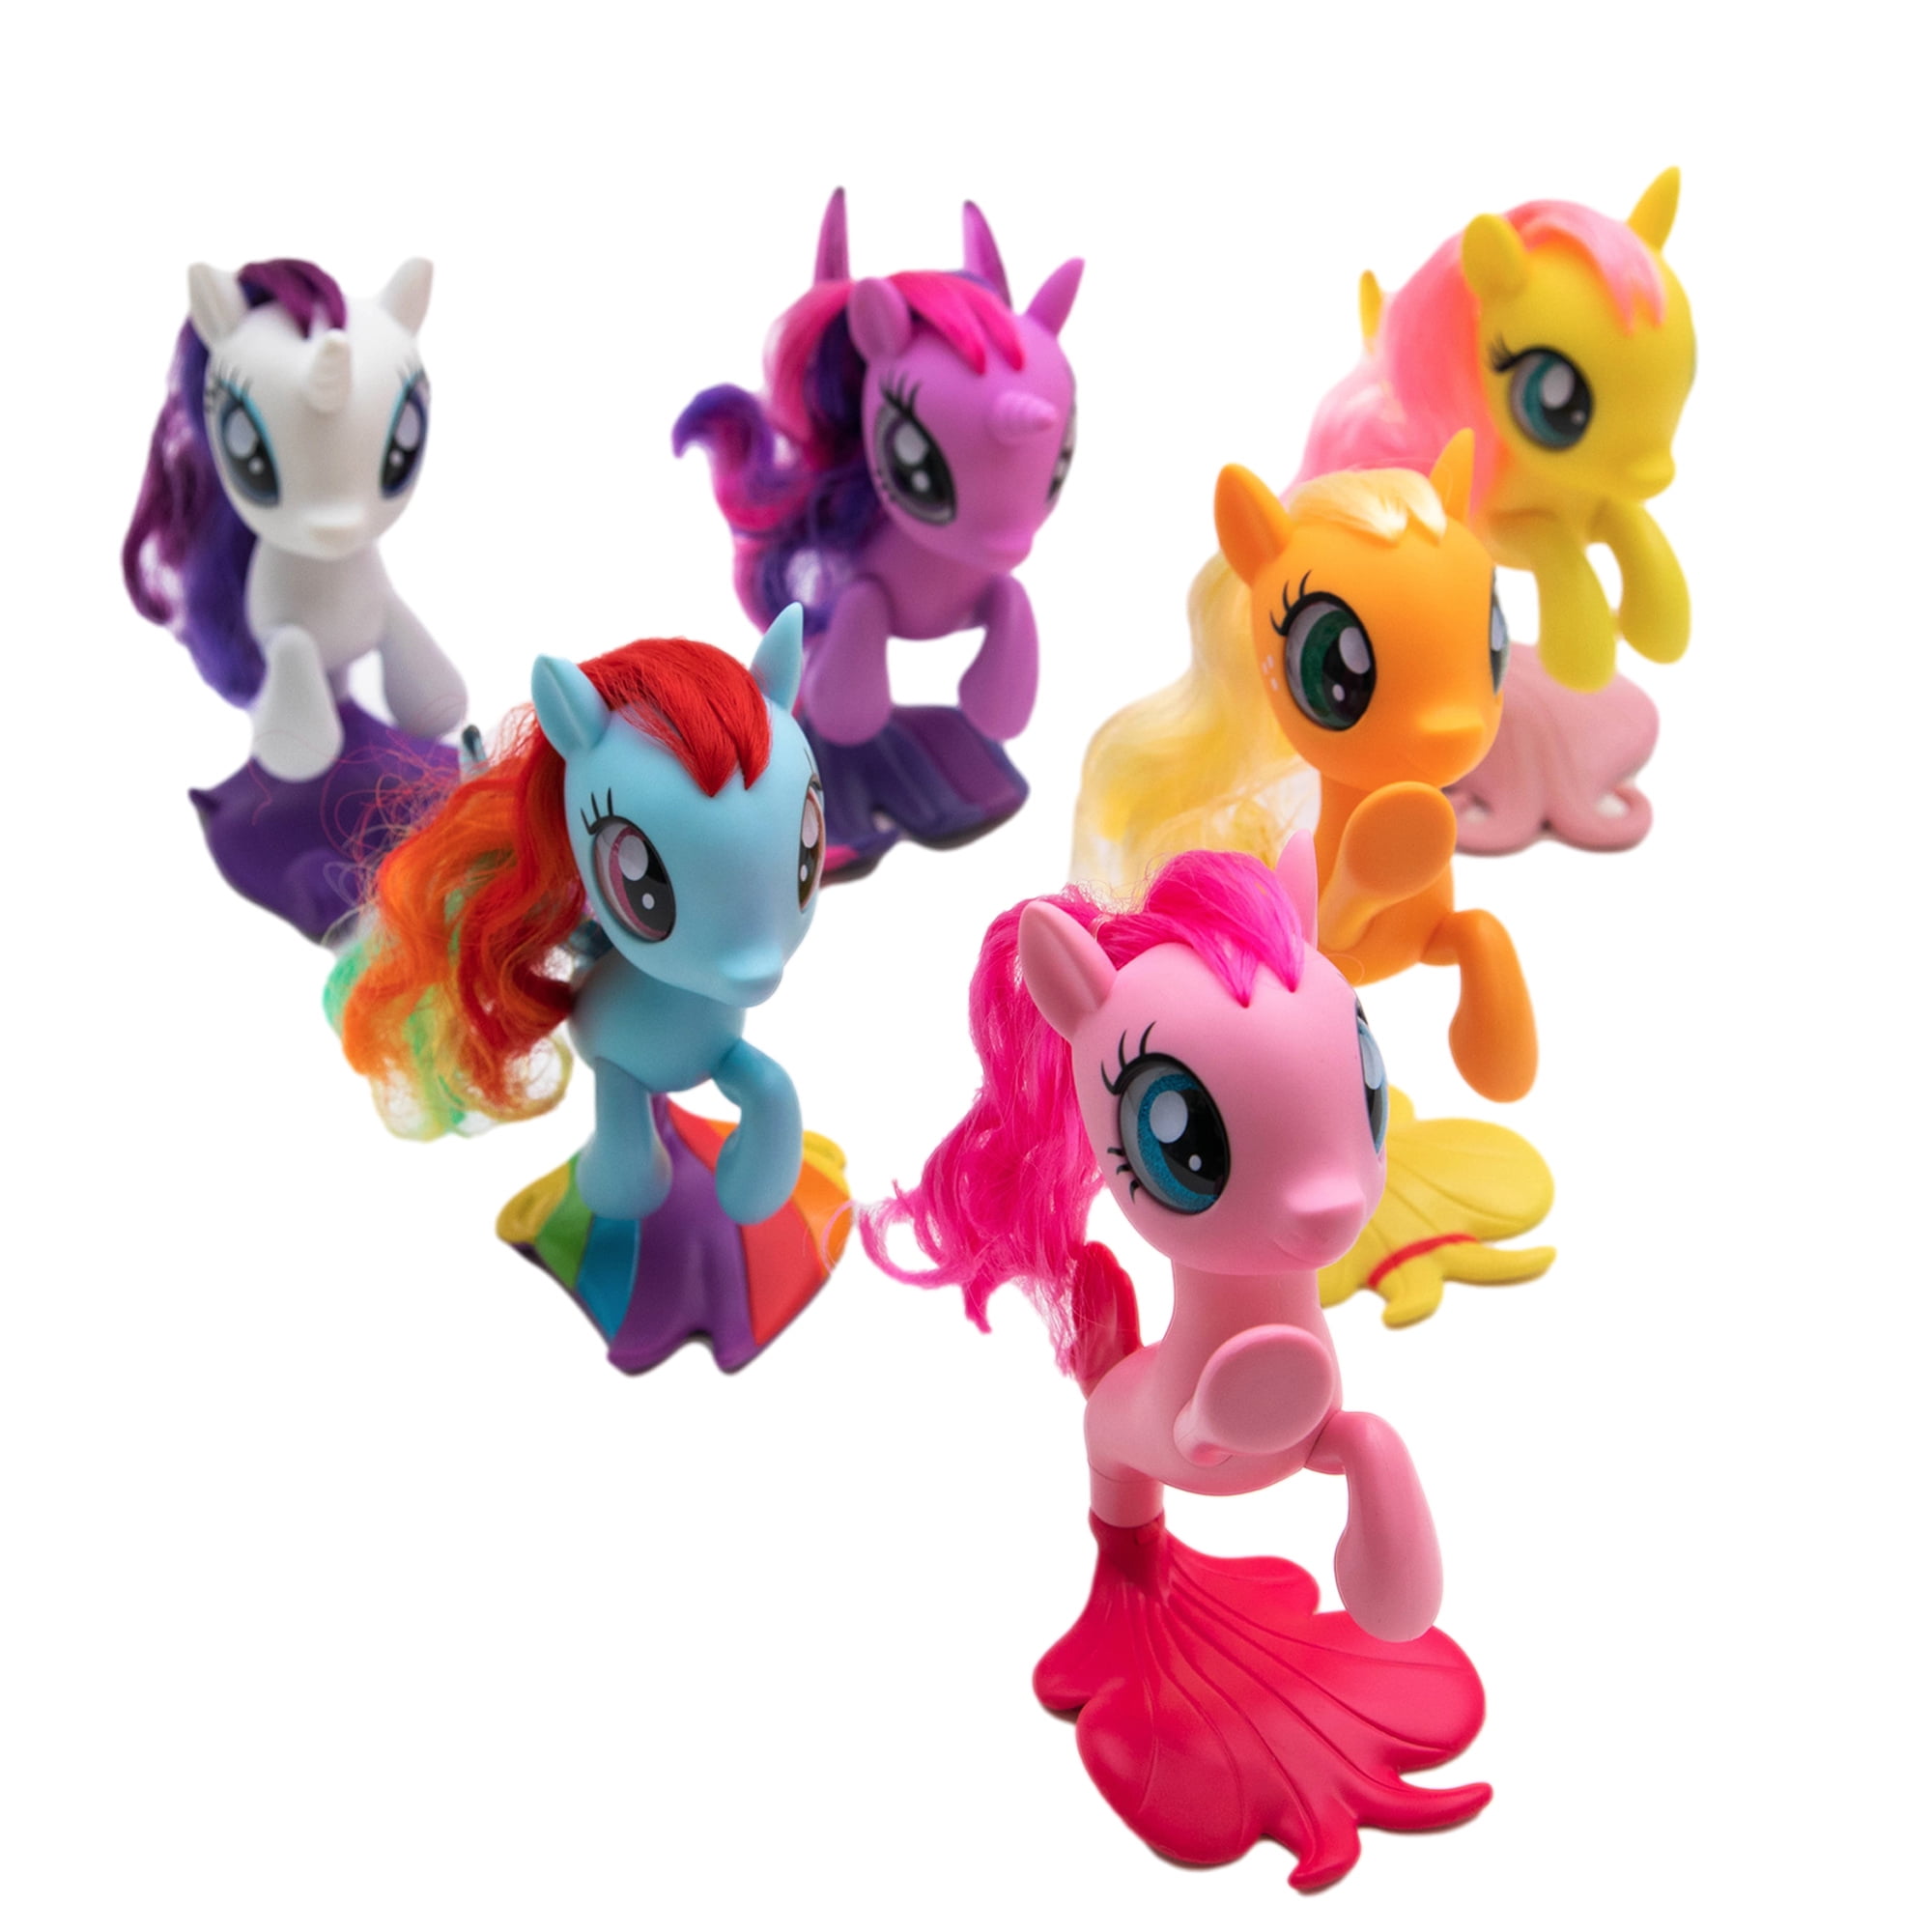 MY LITTLE PONY Complete Set 6 FIGURES for Collectors 3D FIGURINES with Base 2" 